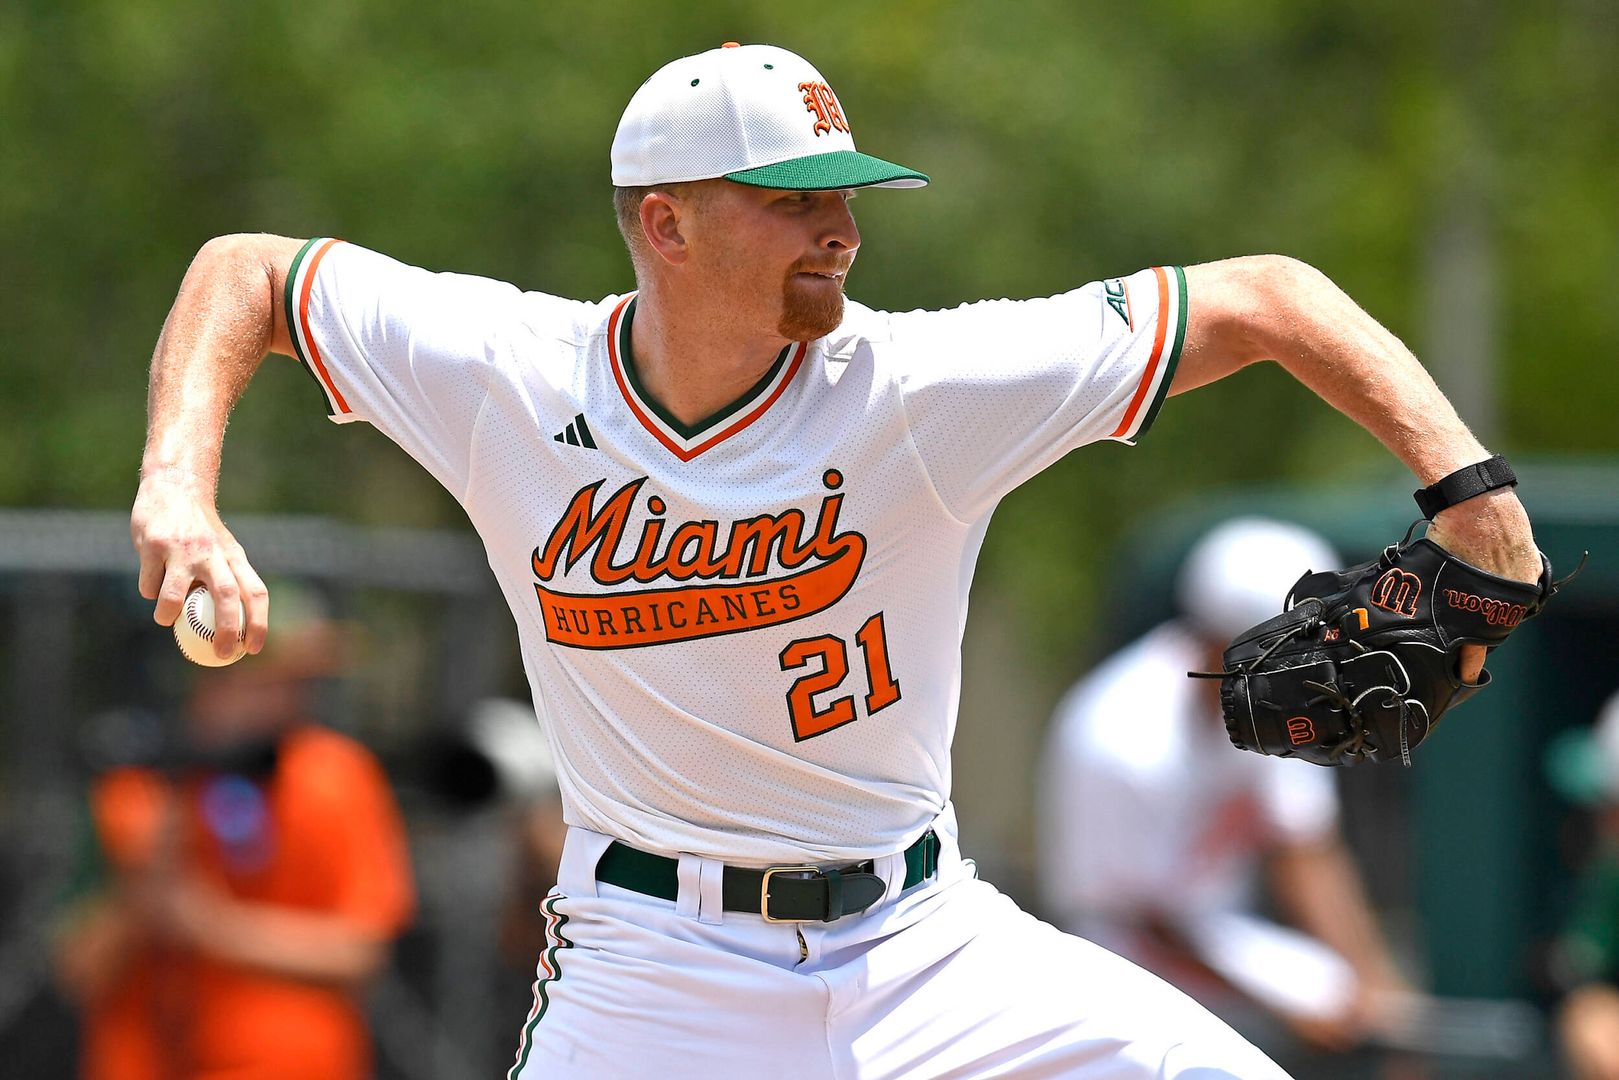 Walters Named to NCBWA Midseason Stopper of the Year Award Watch List